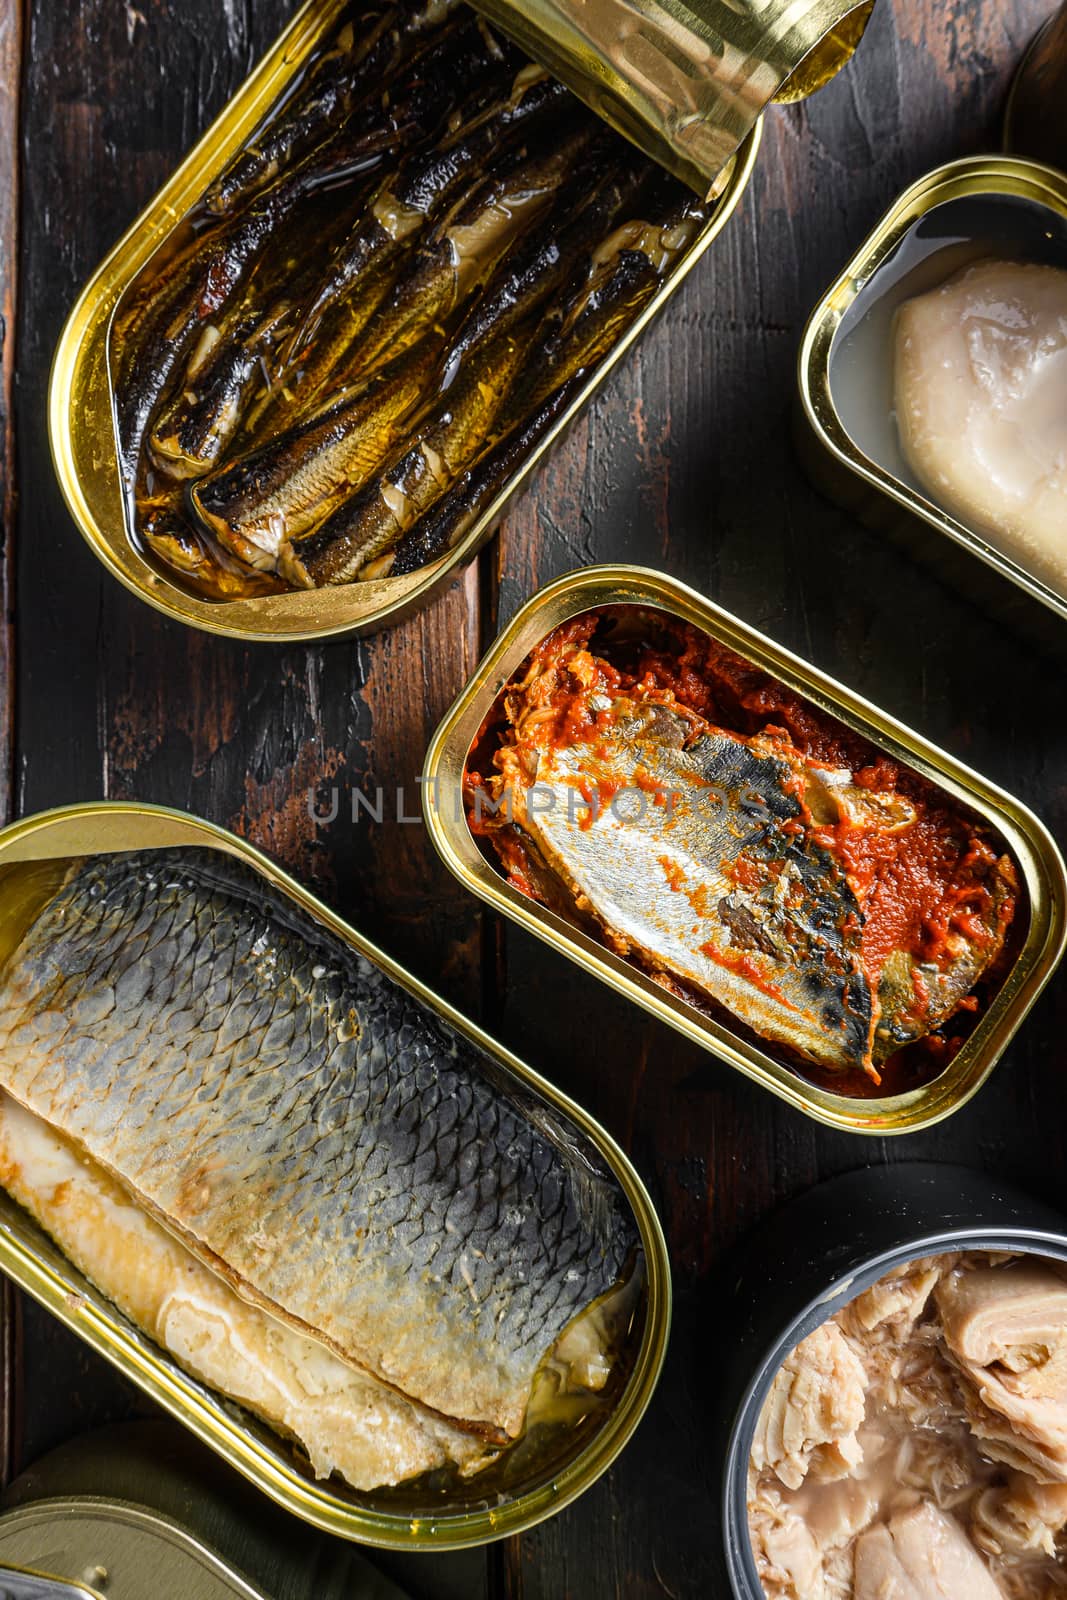 Conserves of canned fish with different types of fish and seafood, opened and closed cans with Saury, mackerel, sprats, sardines, pilchard, squid, tuna, over old wood surface, top view by Ilianesolenyi